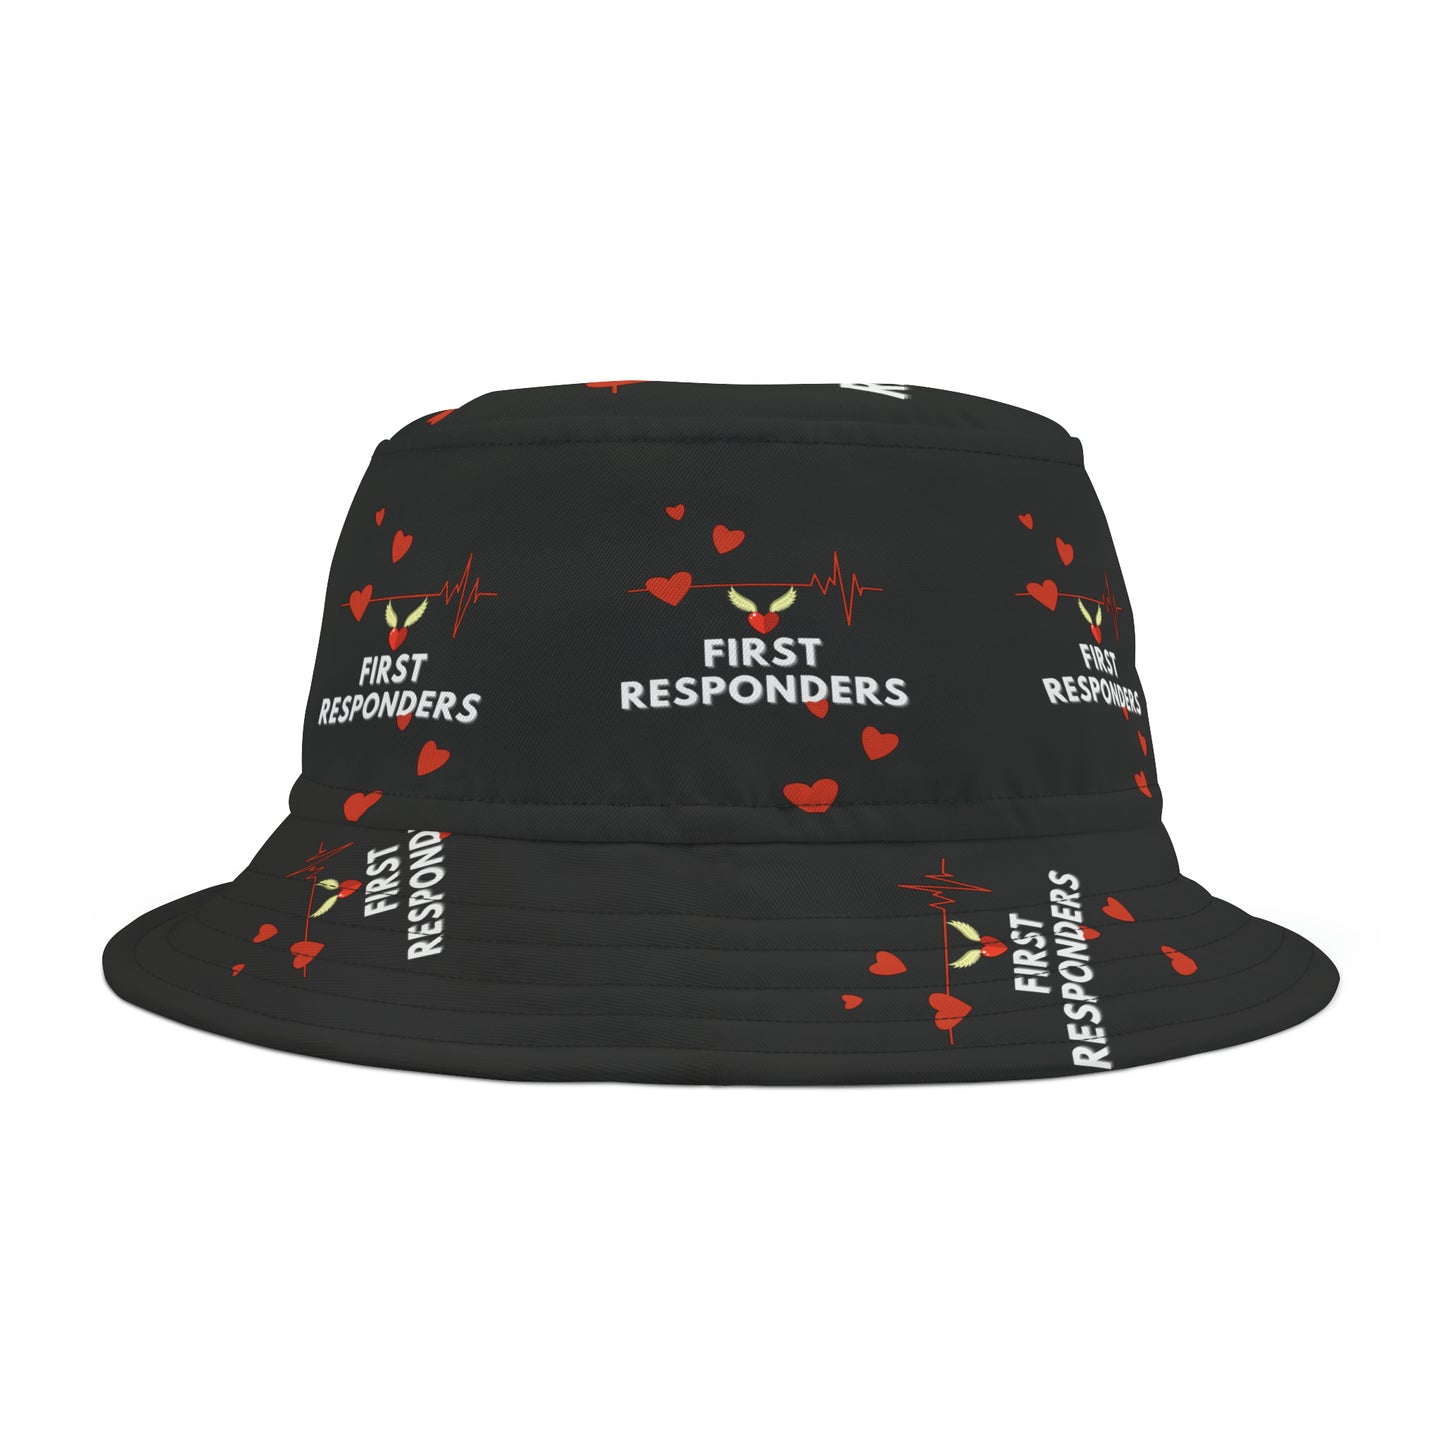 First Responders Themed Bucket Hat